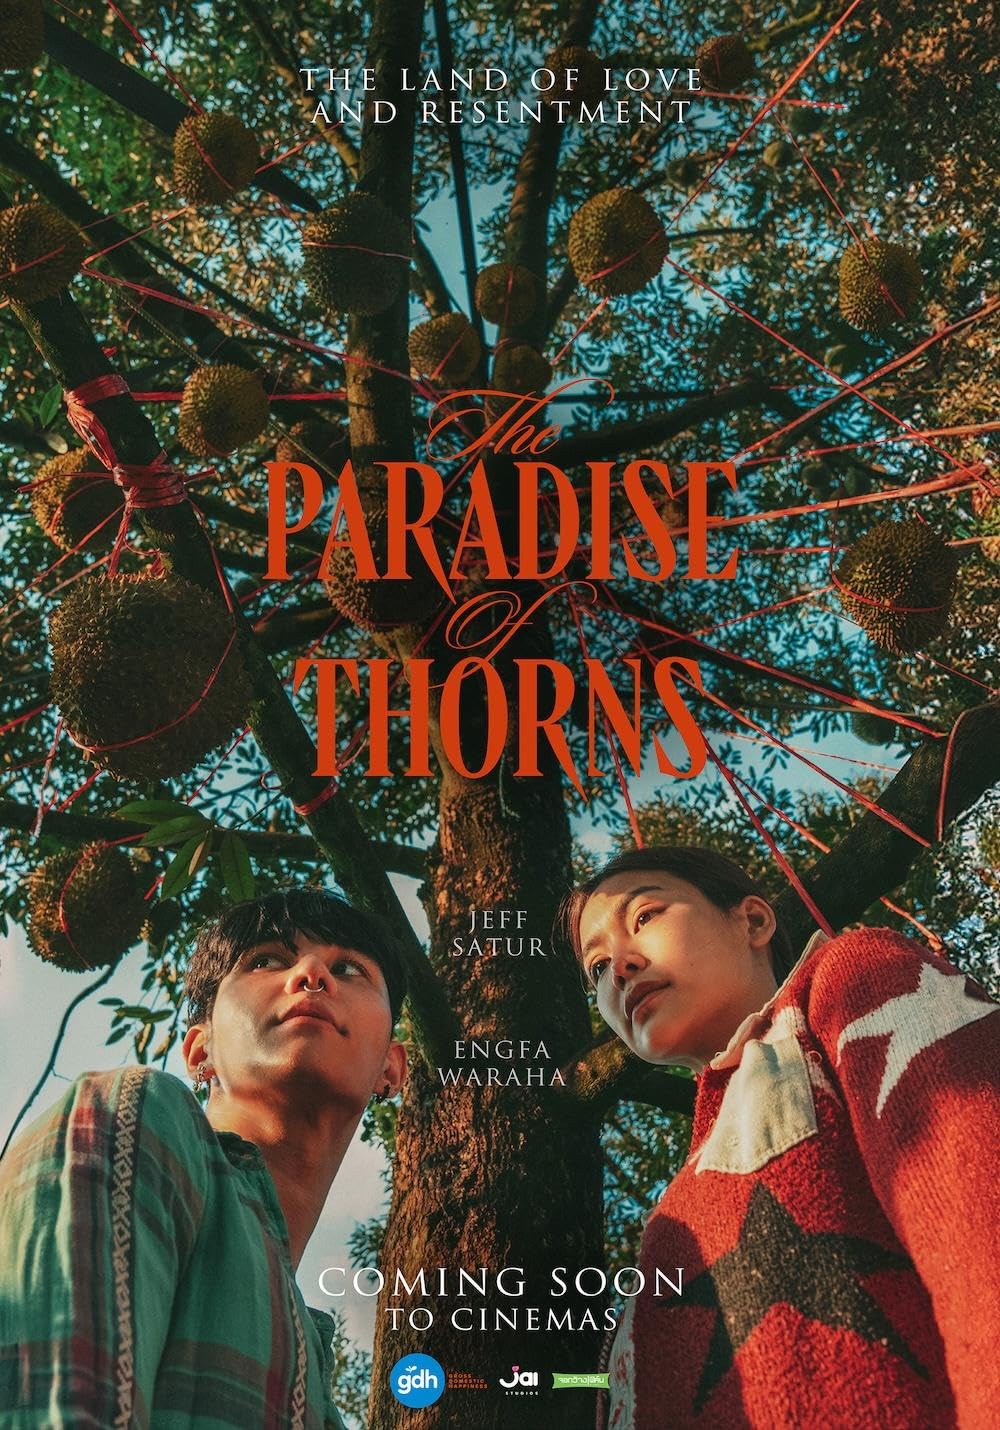 THE PARADISE OF THORNS